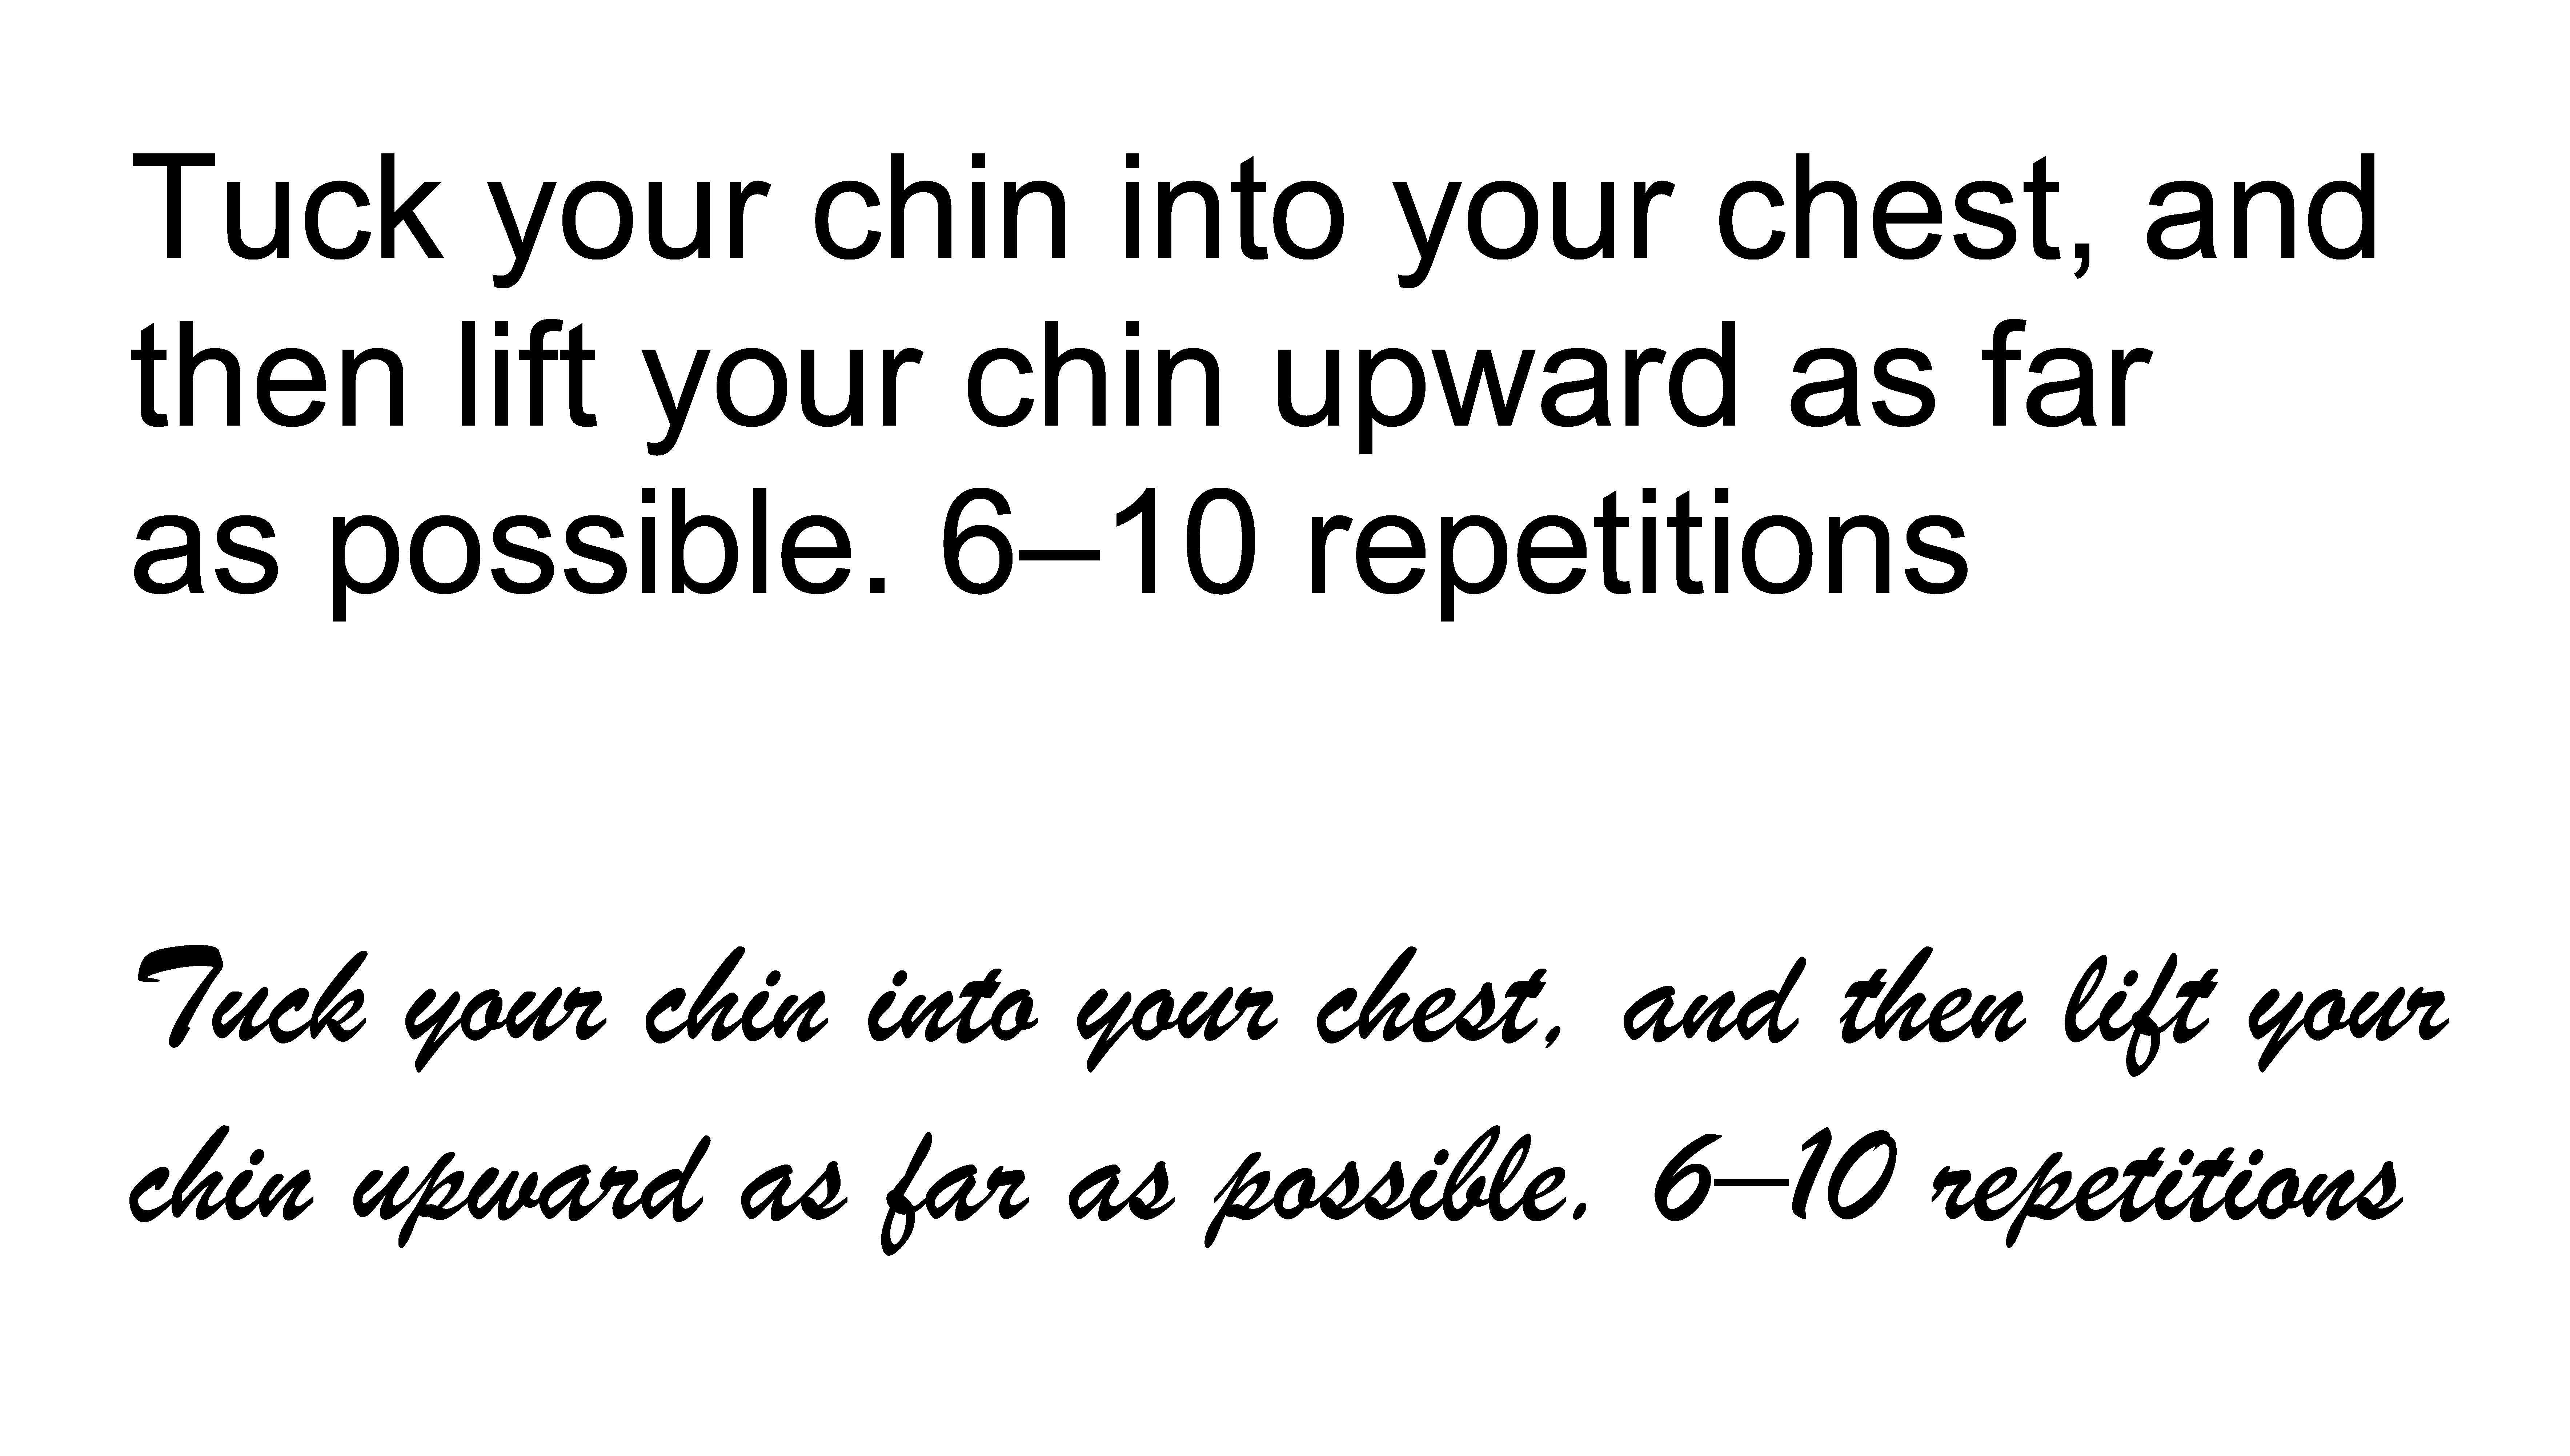 Part of the exercise description used by Song and Schwarz